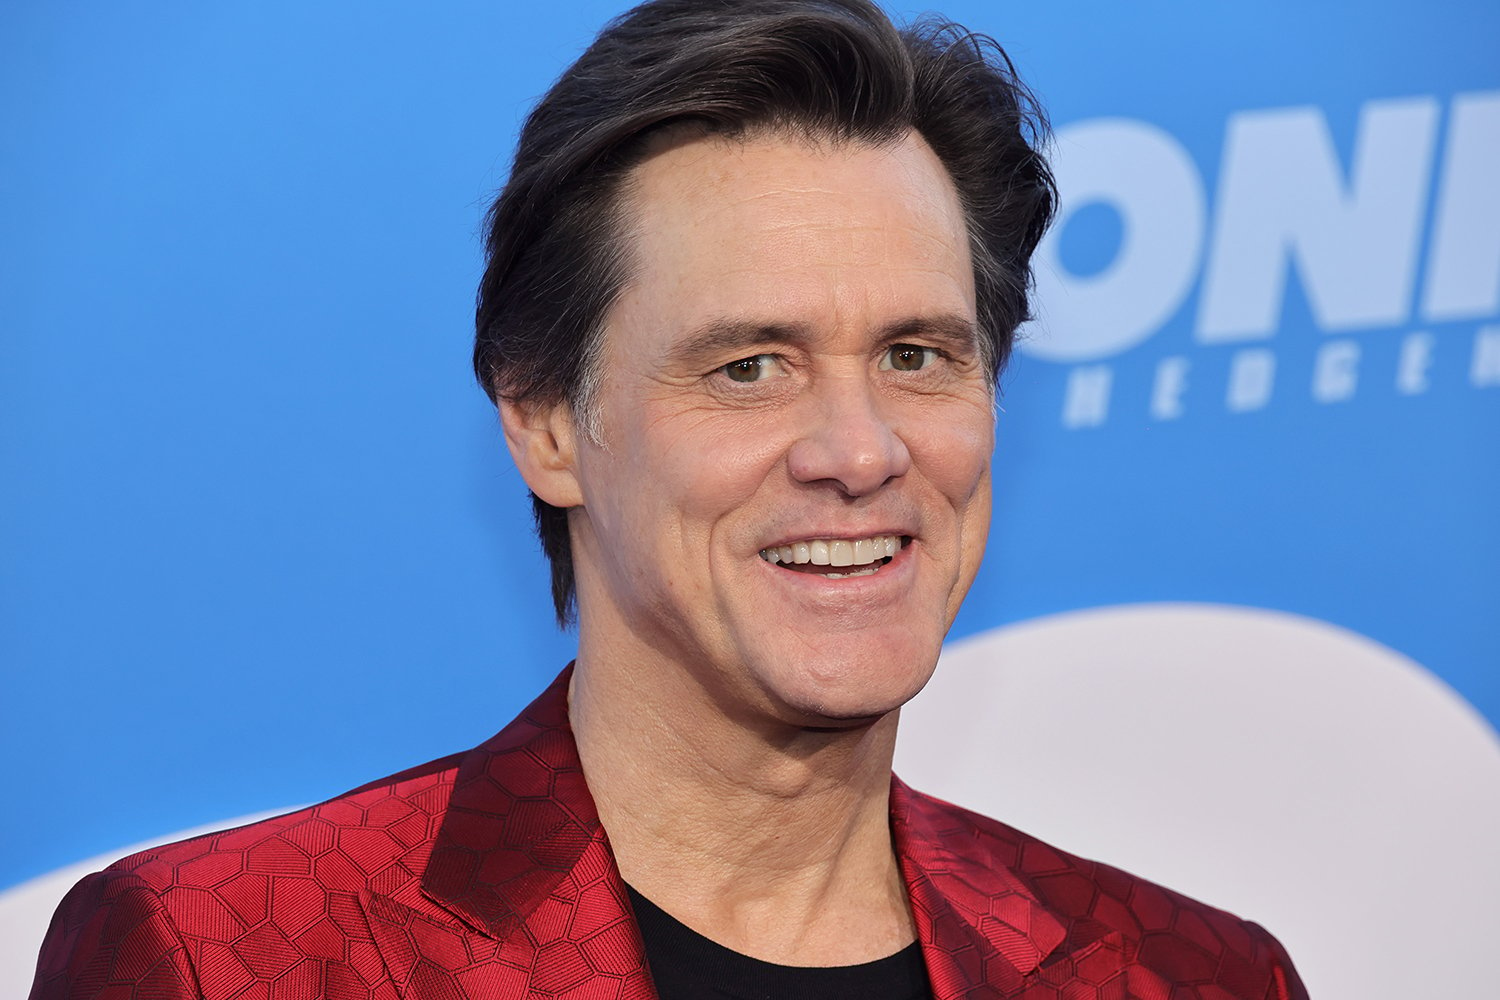 Jim Carrey attends the Sonic the Hedgehog 2 premiere.